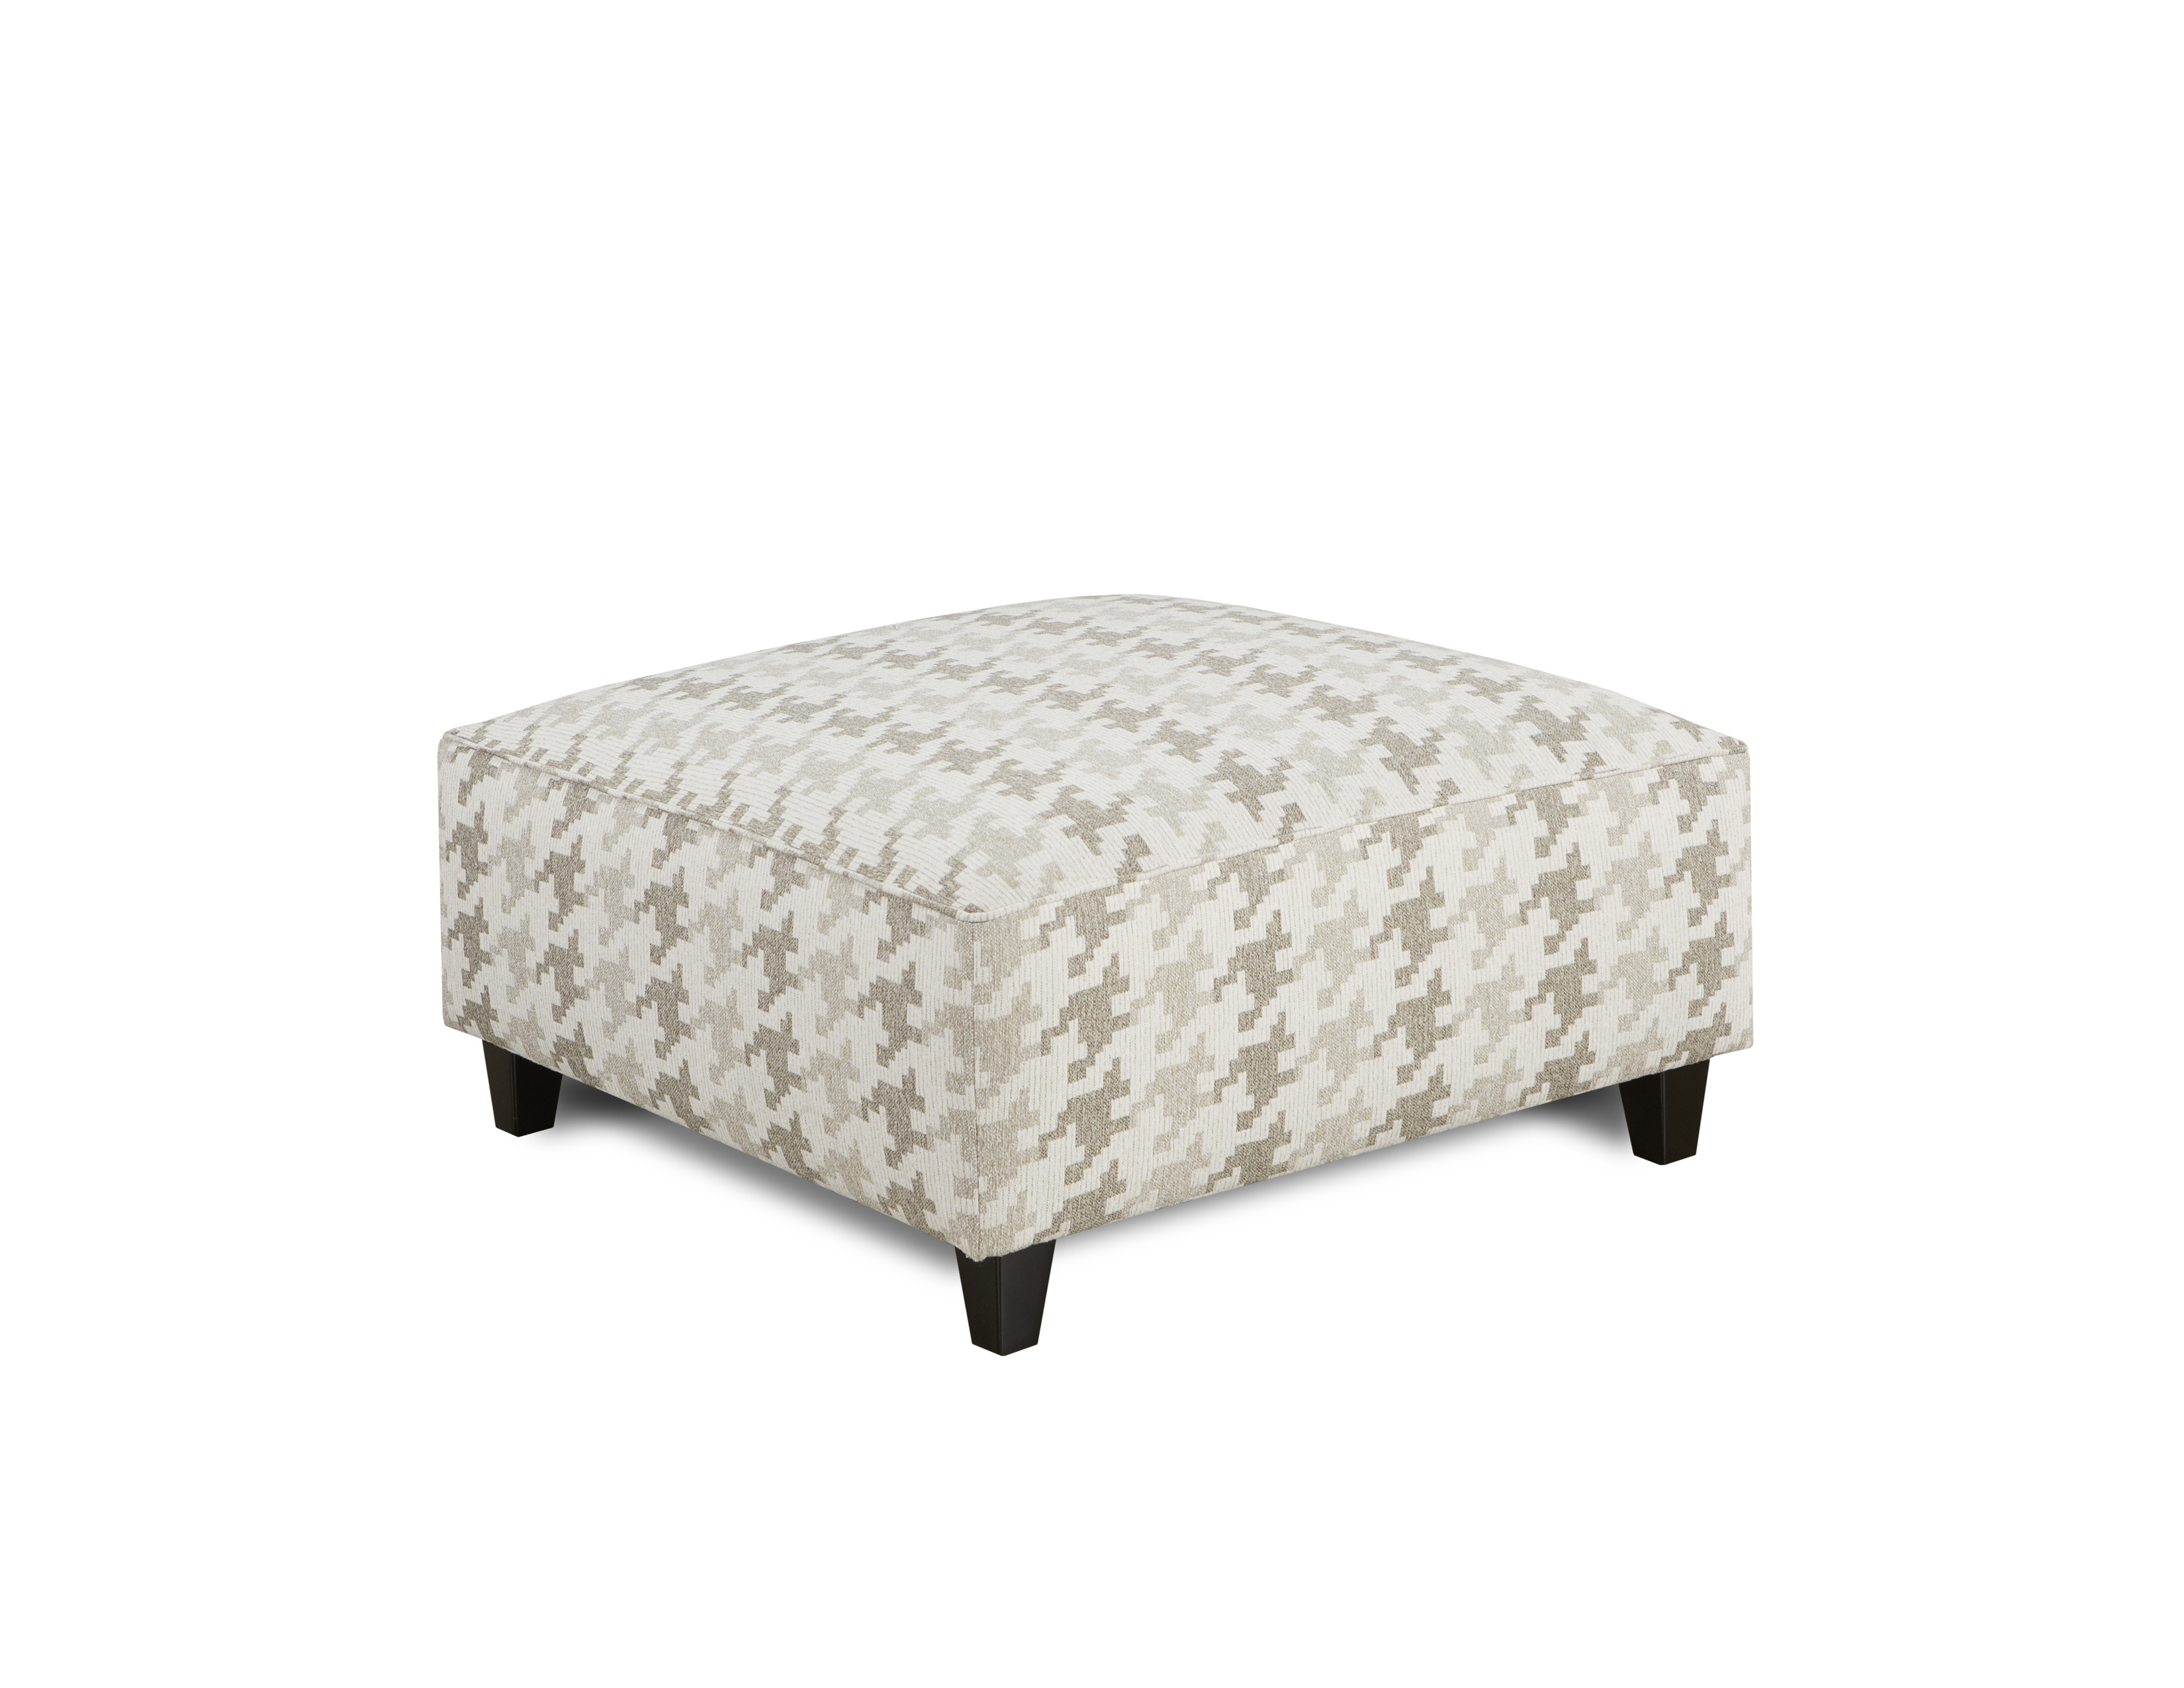 BB Con Fusion Furniture ottoman, Basic Wool collection